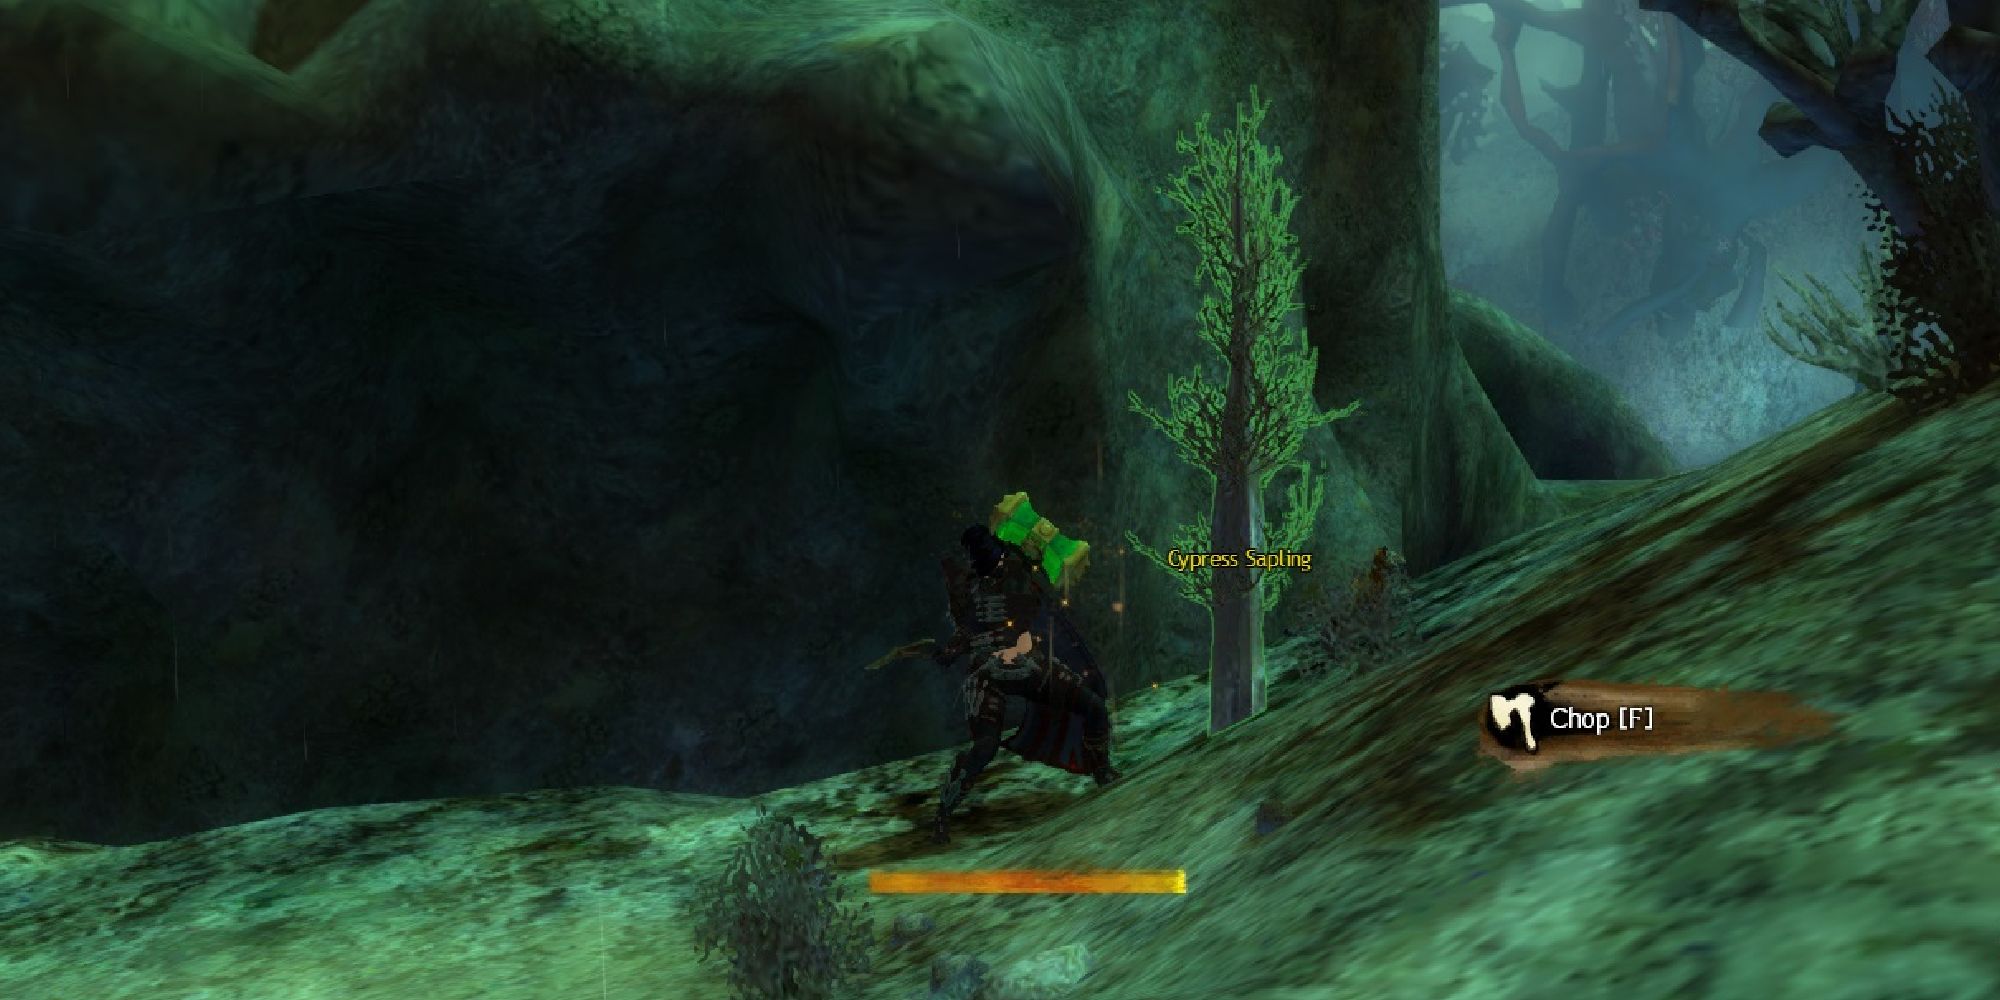 player chopping a tree